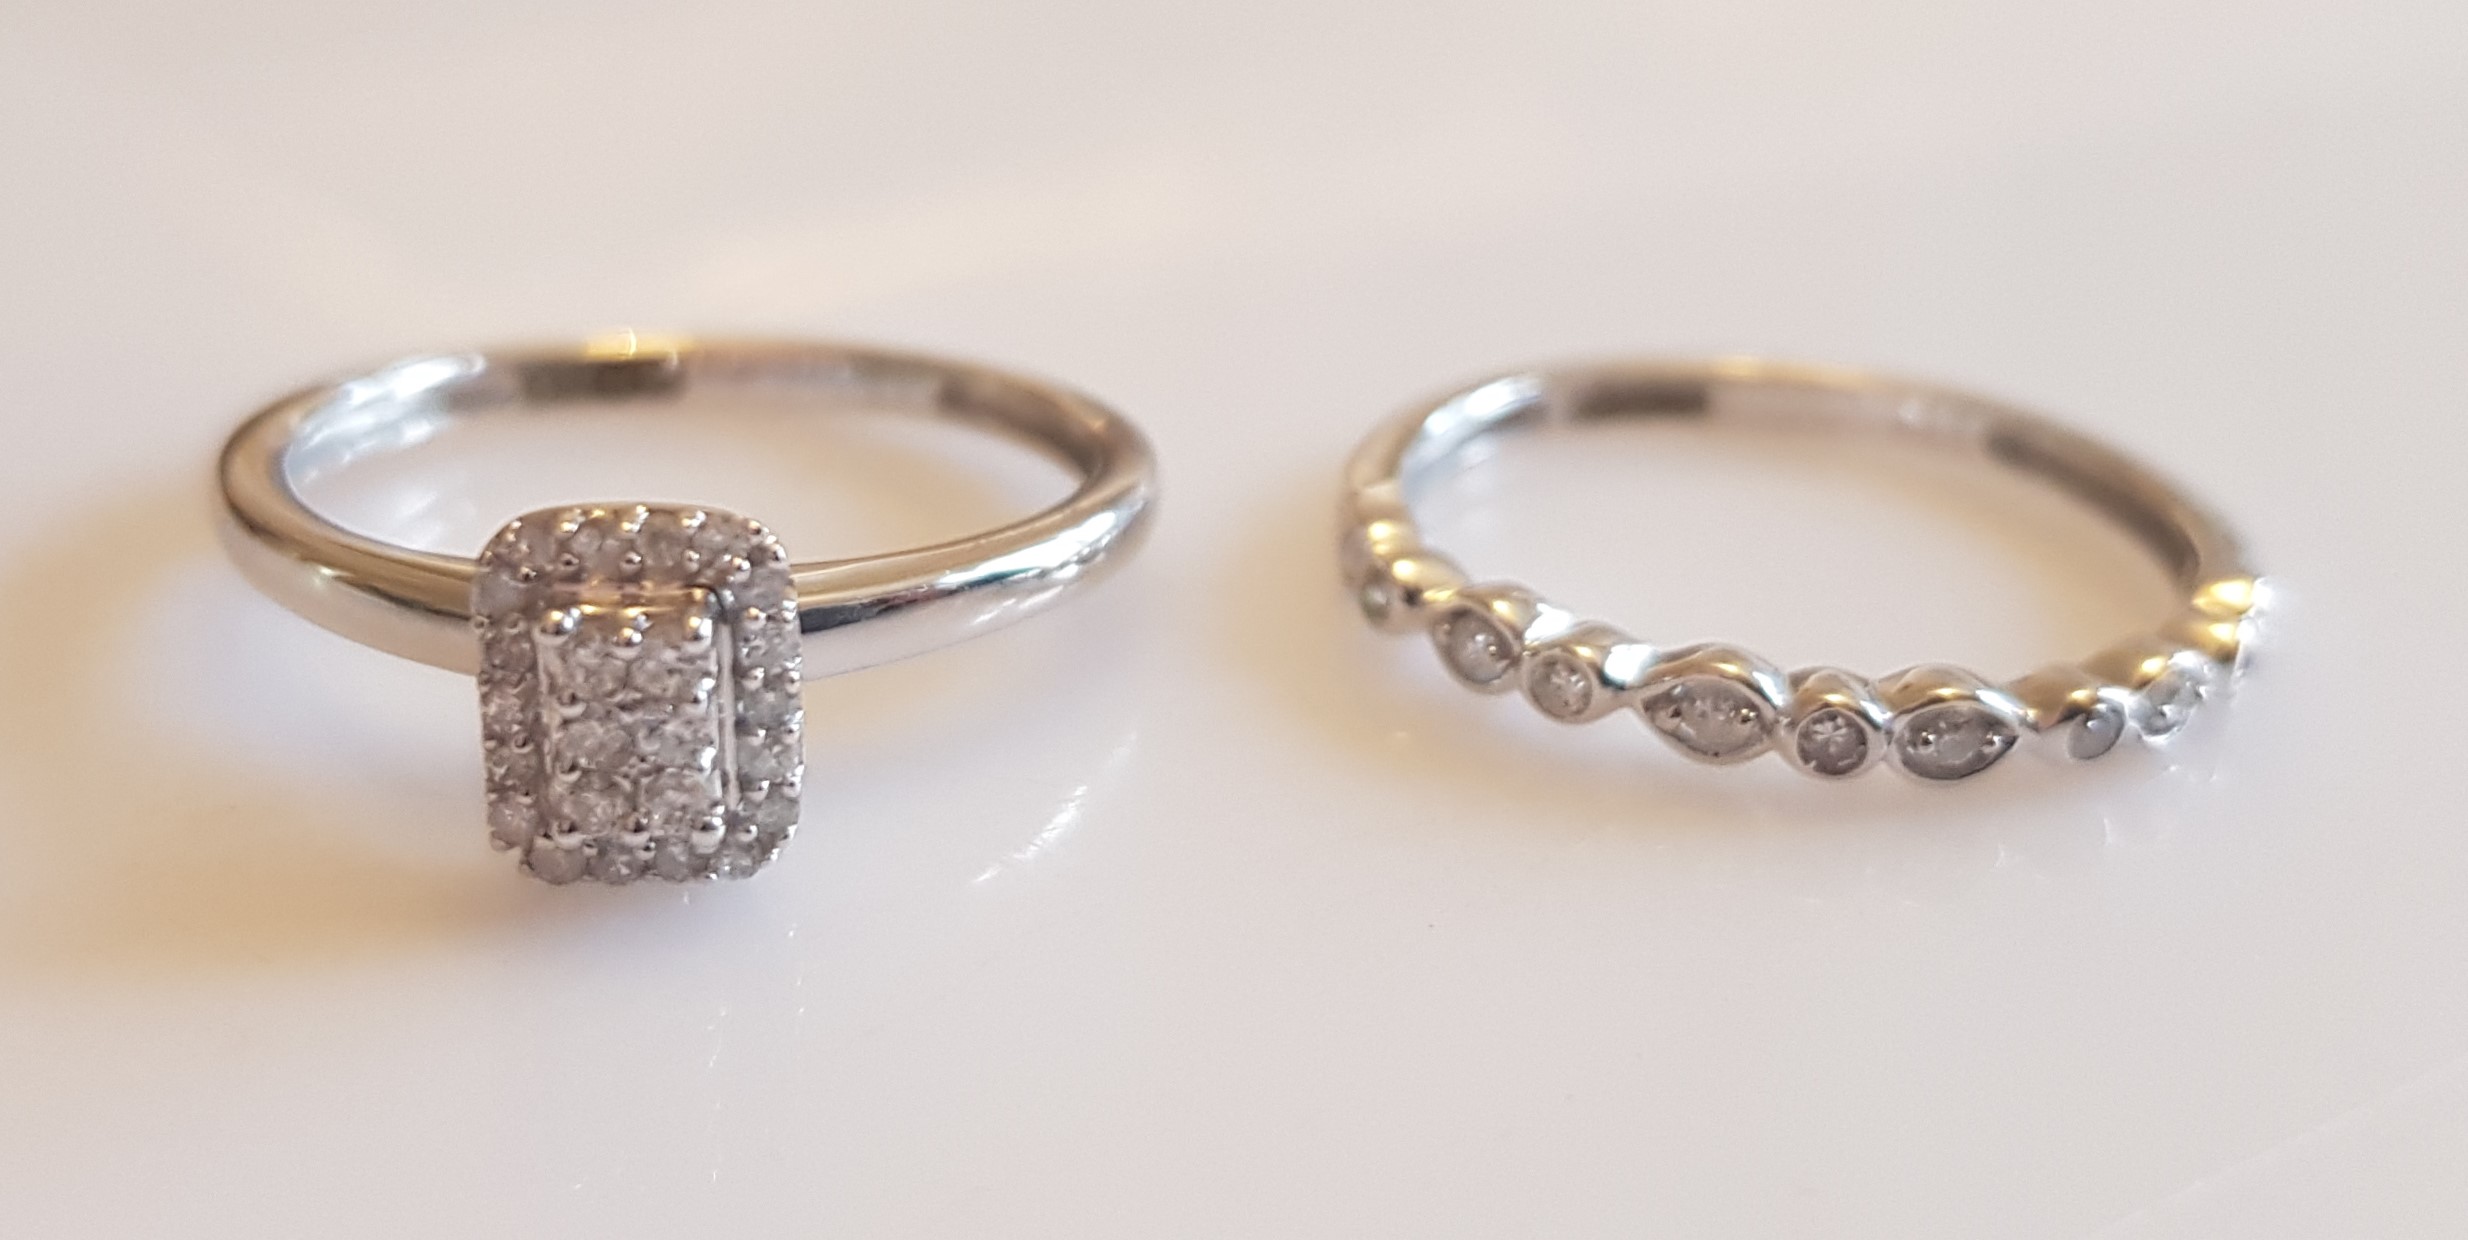 *A 9ct white gold and diamond engagement ring and half eternity ring set, both set with diamond